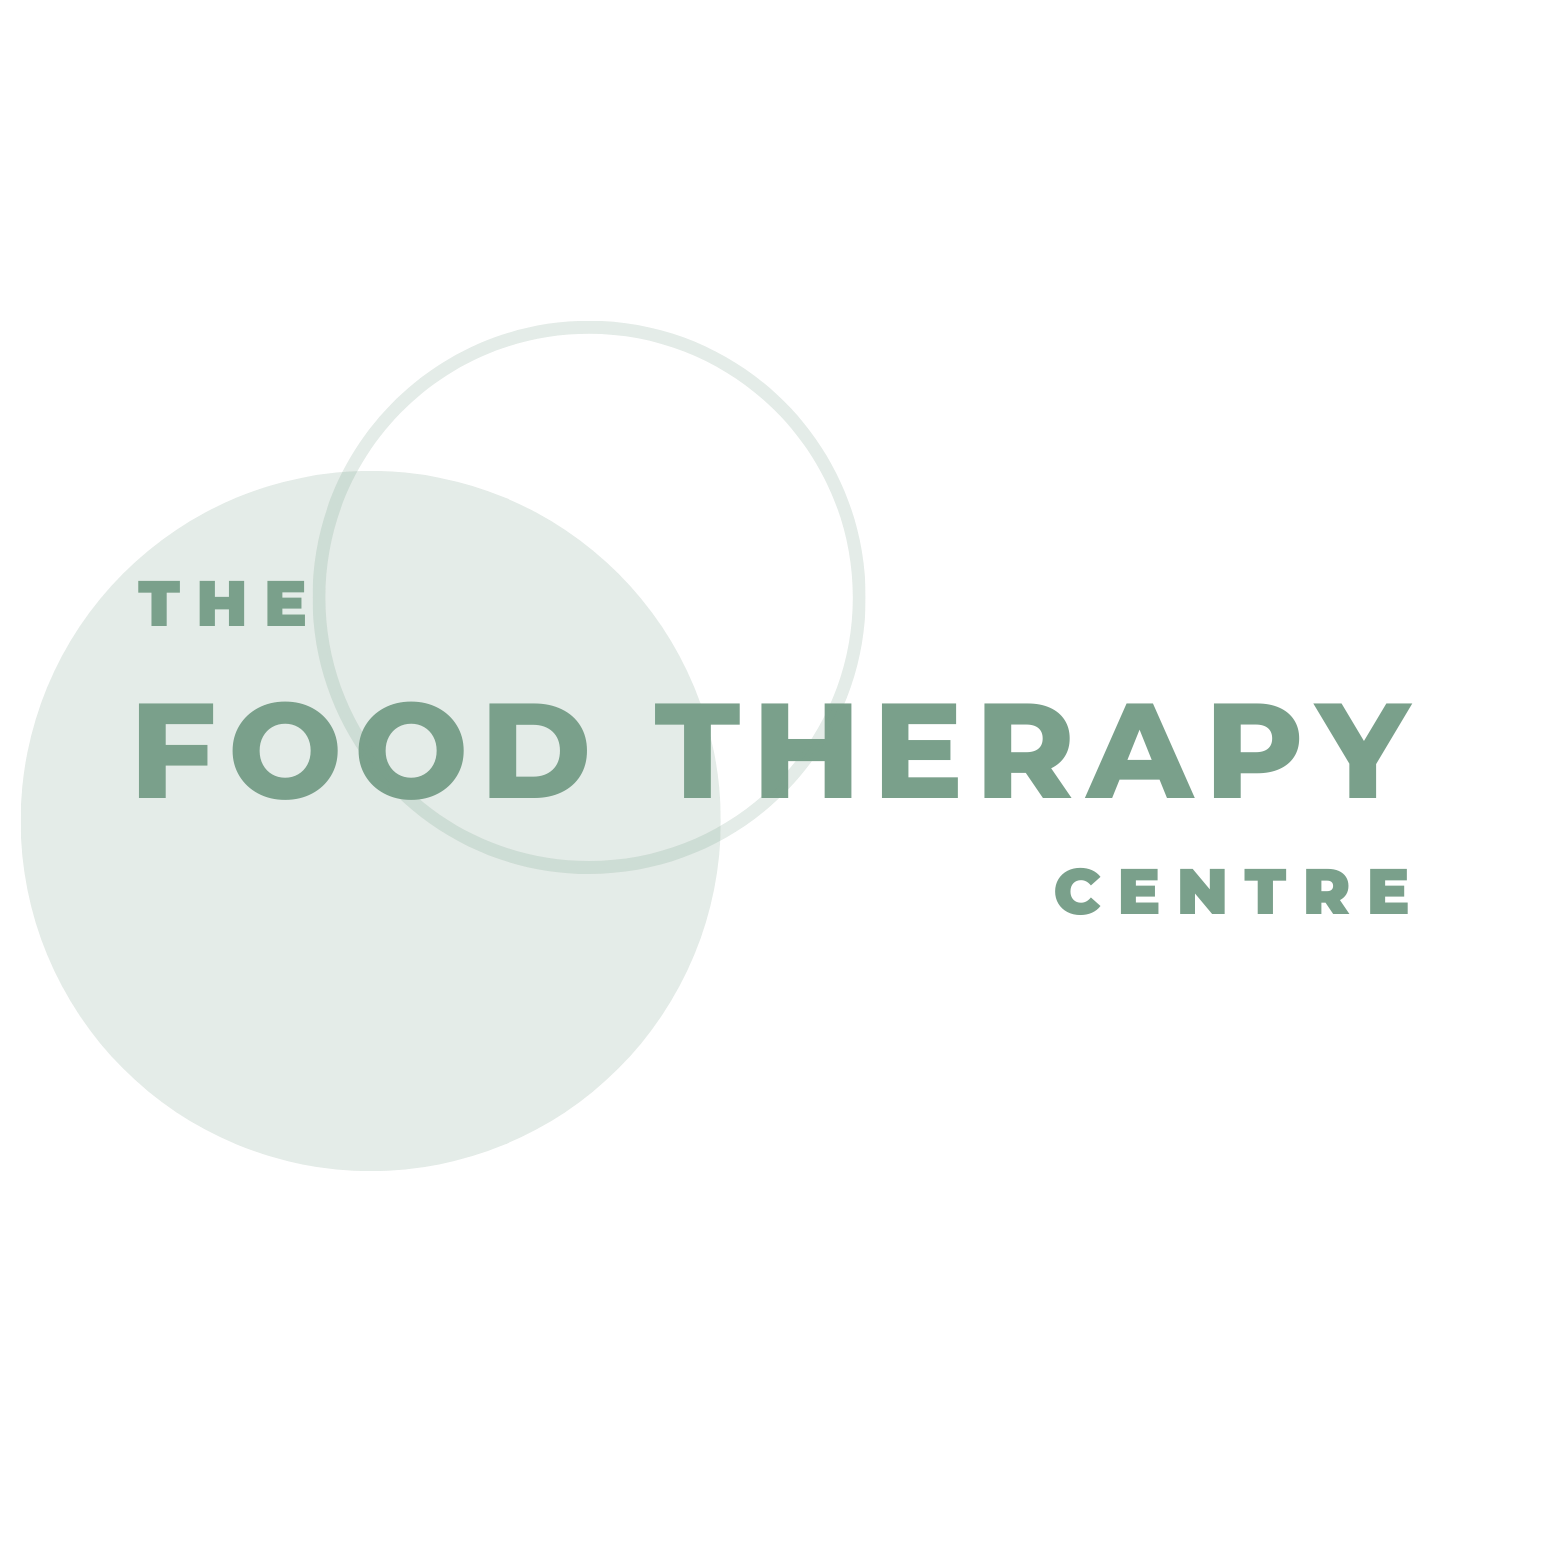 The Food Therapy Centre